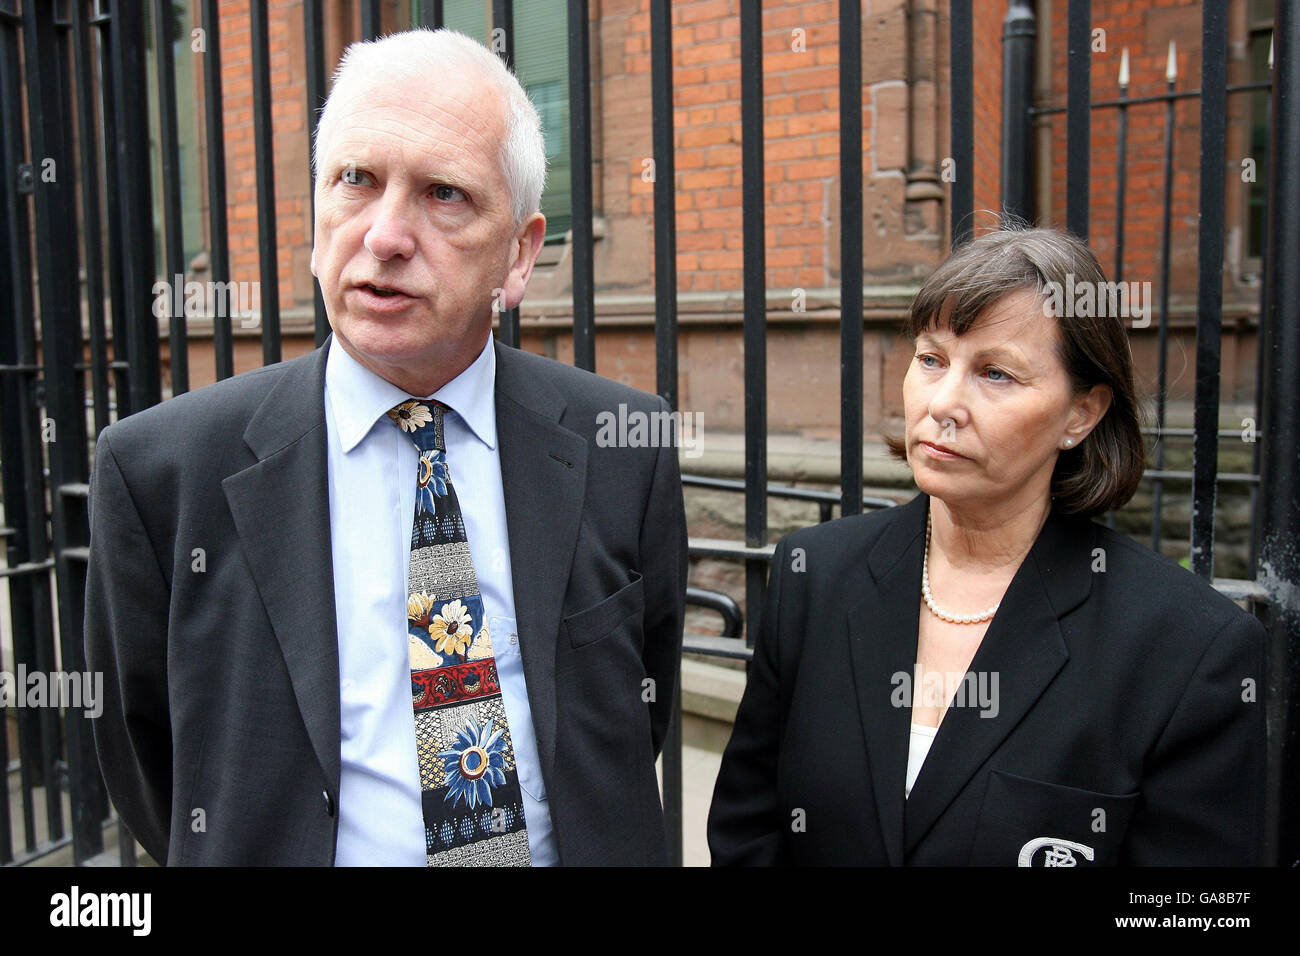 Sam Torney (left) is accompanied by his wife Hilary as he leaves an inquest into the death of his brother John Torney, at Belfast Coroners court. Stock Photo